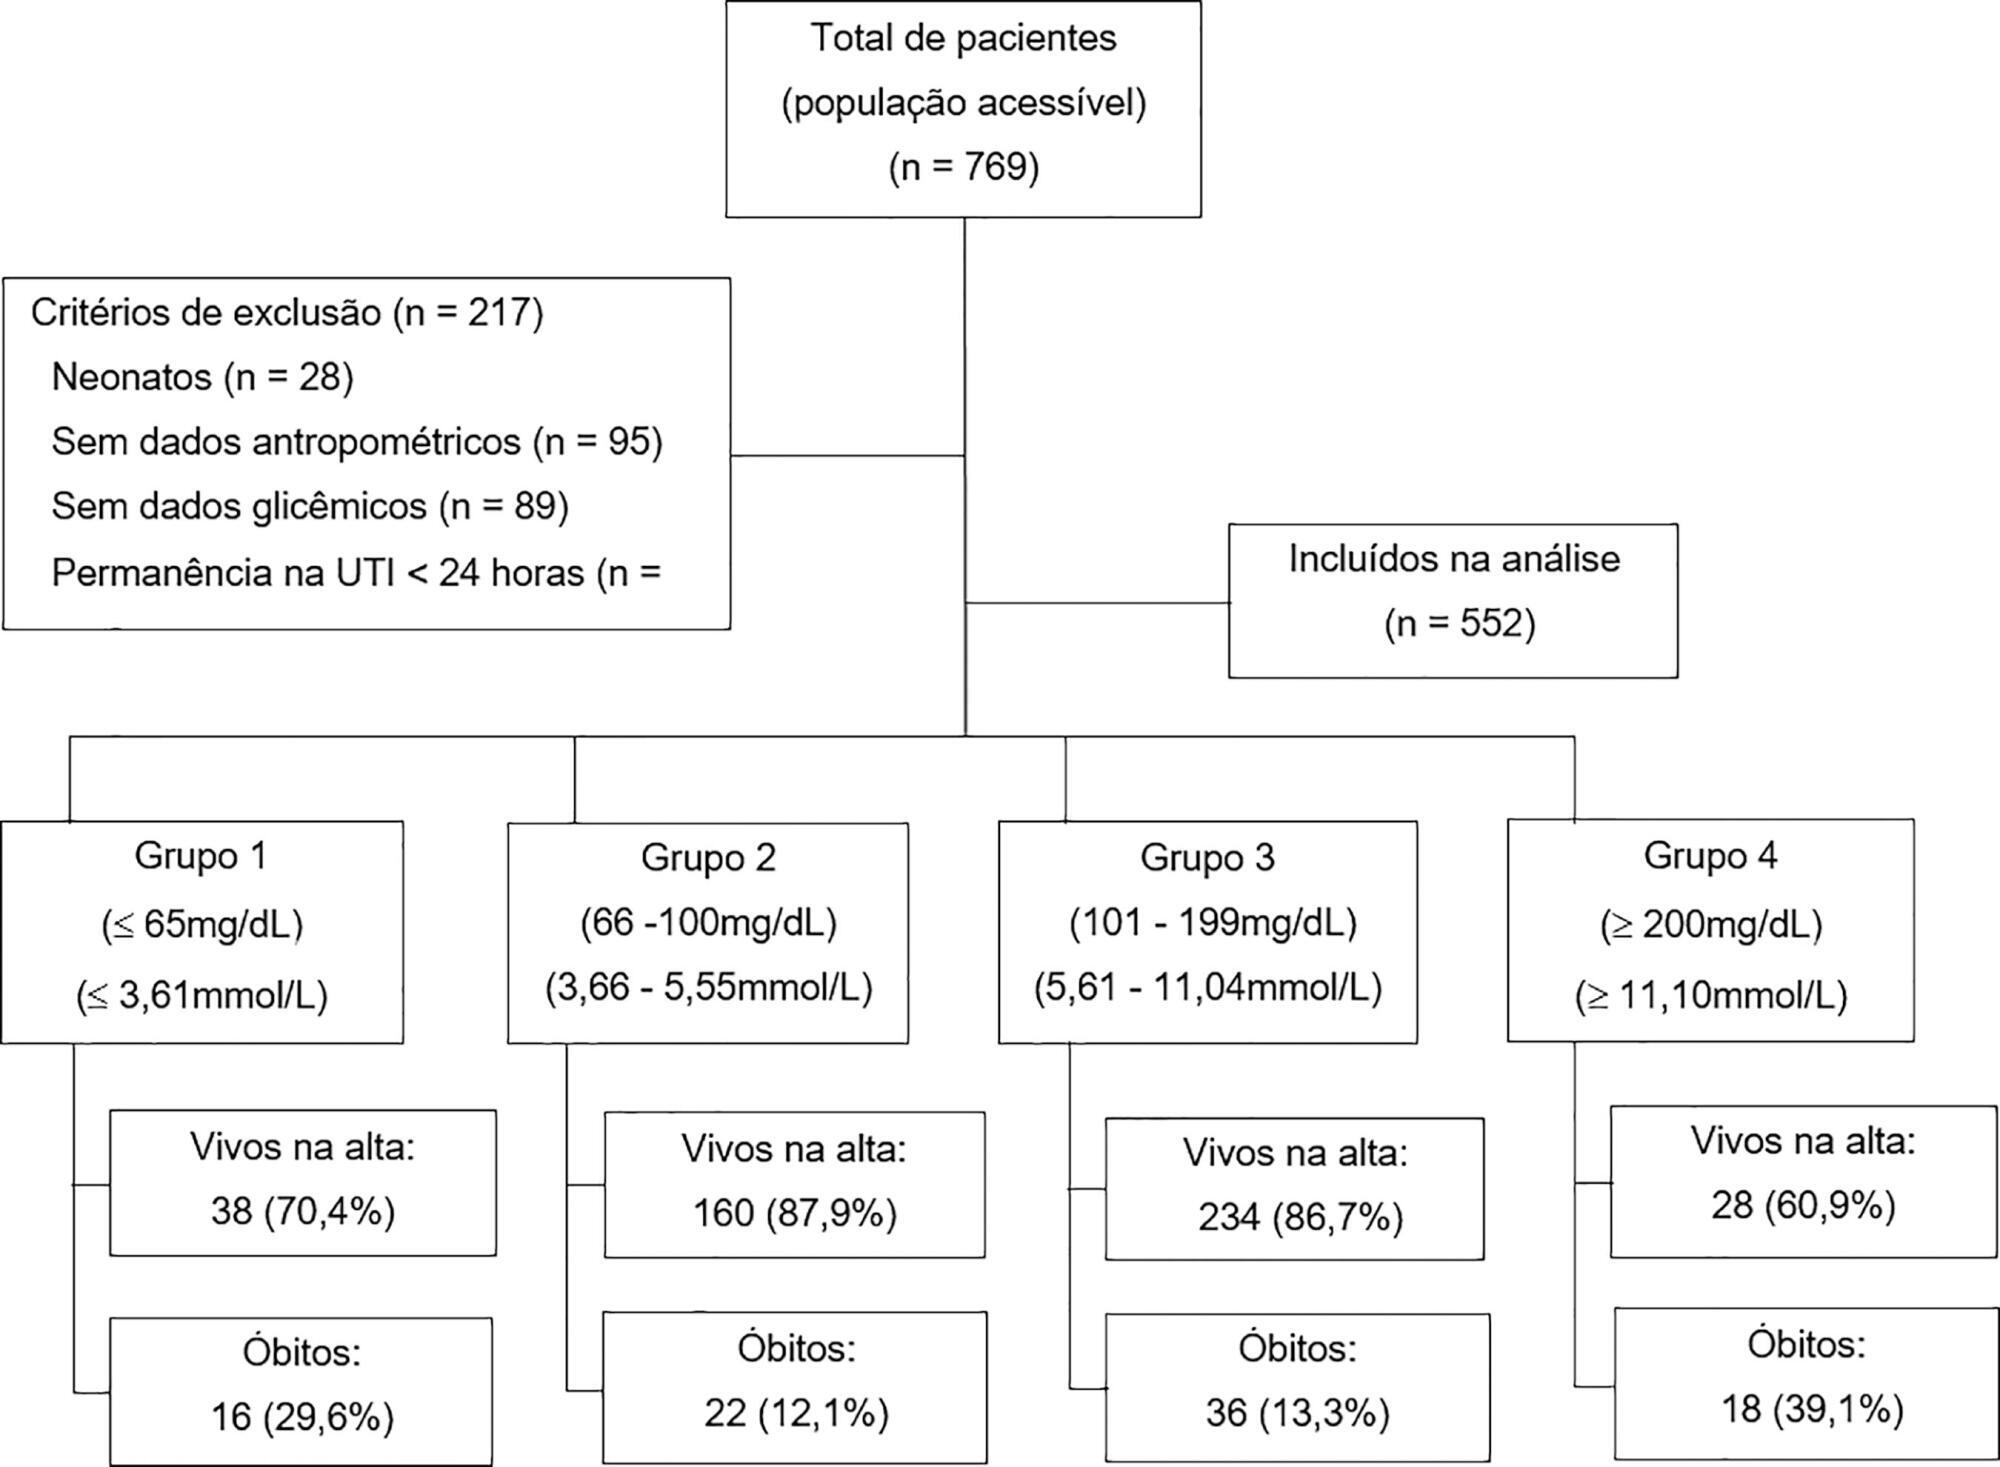 Glycemia upon admission and mortality in a pediatric intensive care unit